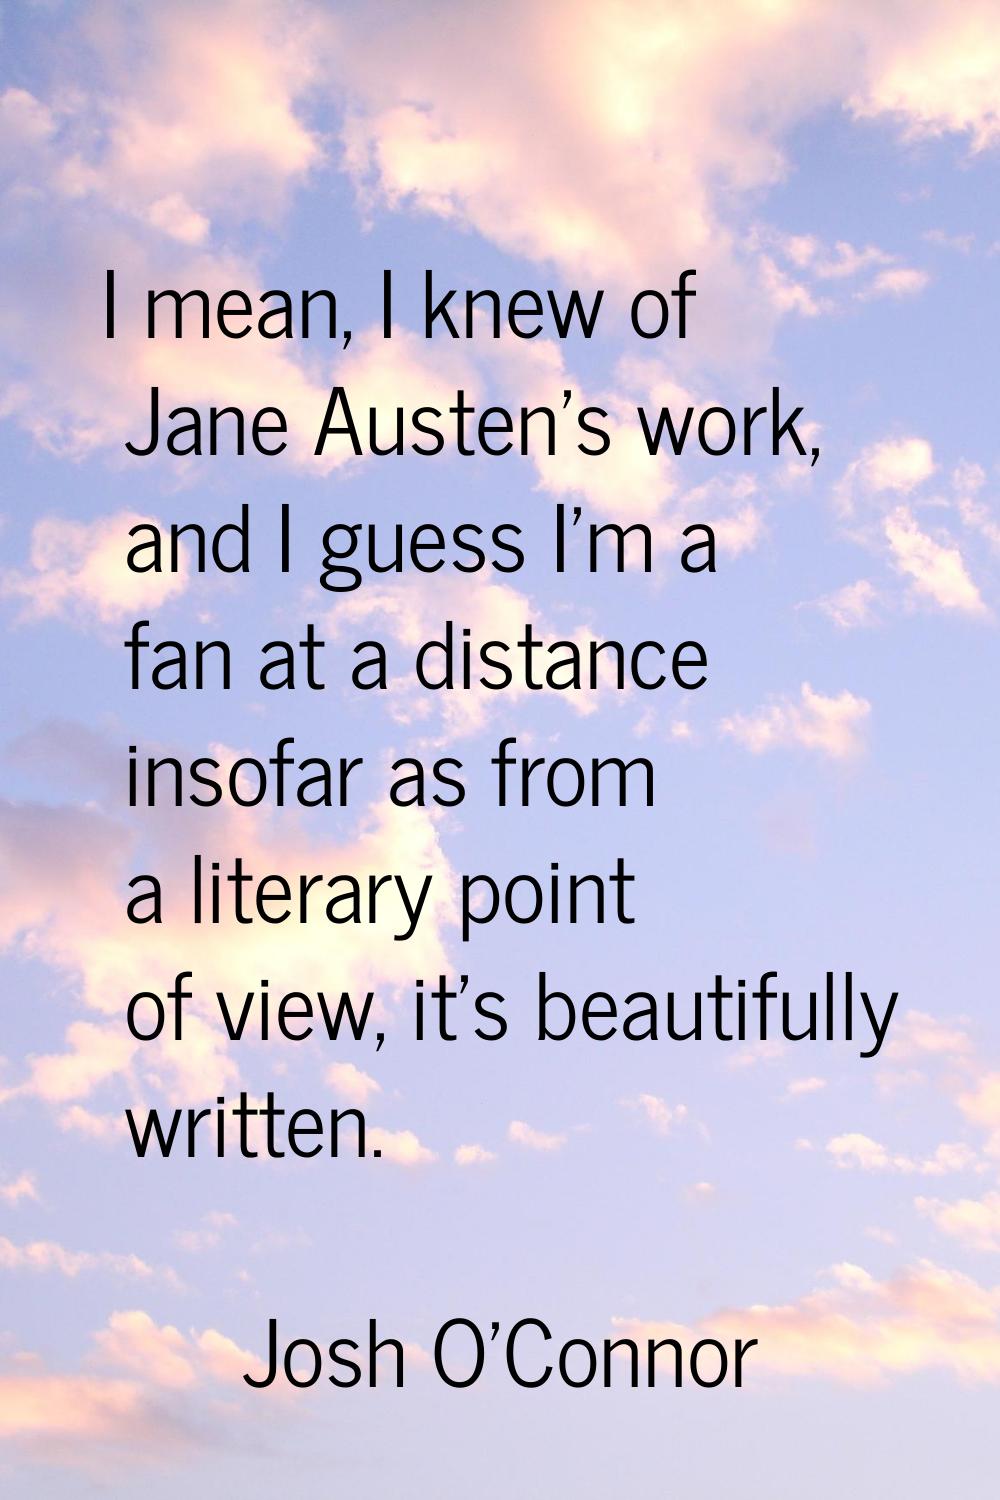 I mean, I knew of Jane Austen's work, and I guess I'm a fan at a distance insofar as from a literar